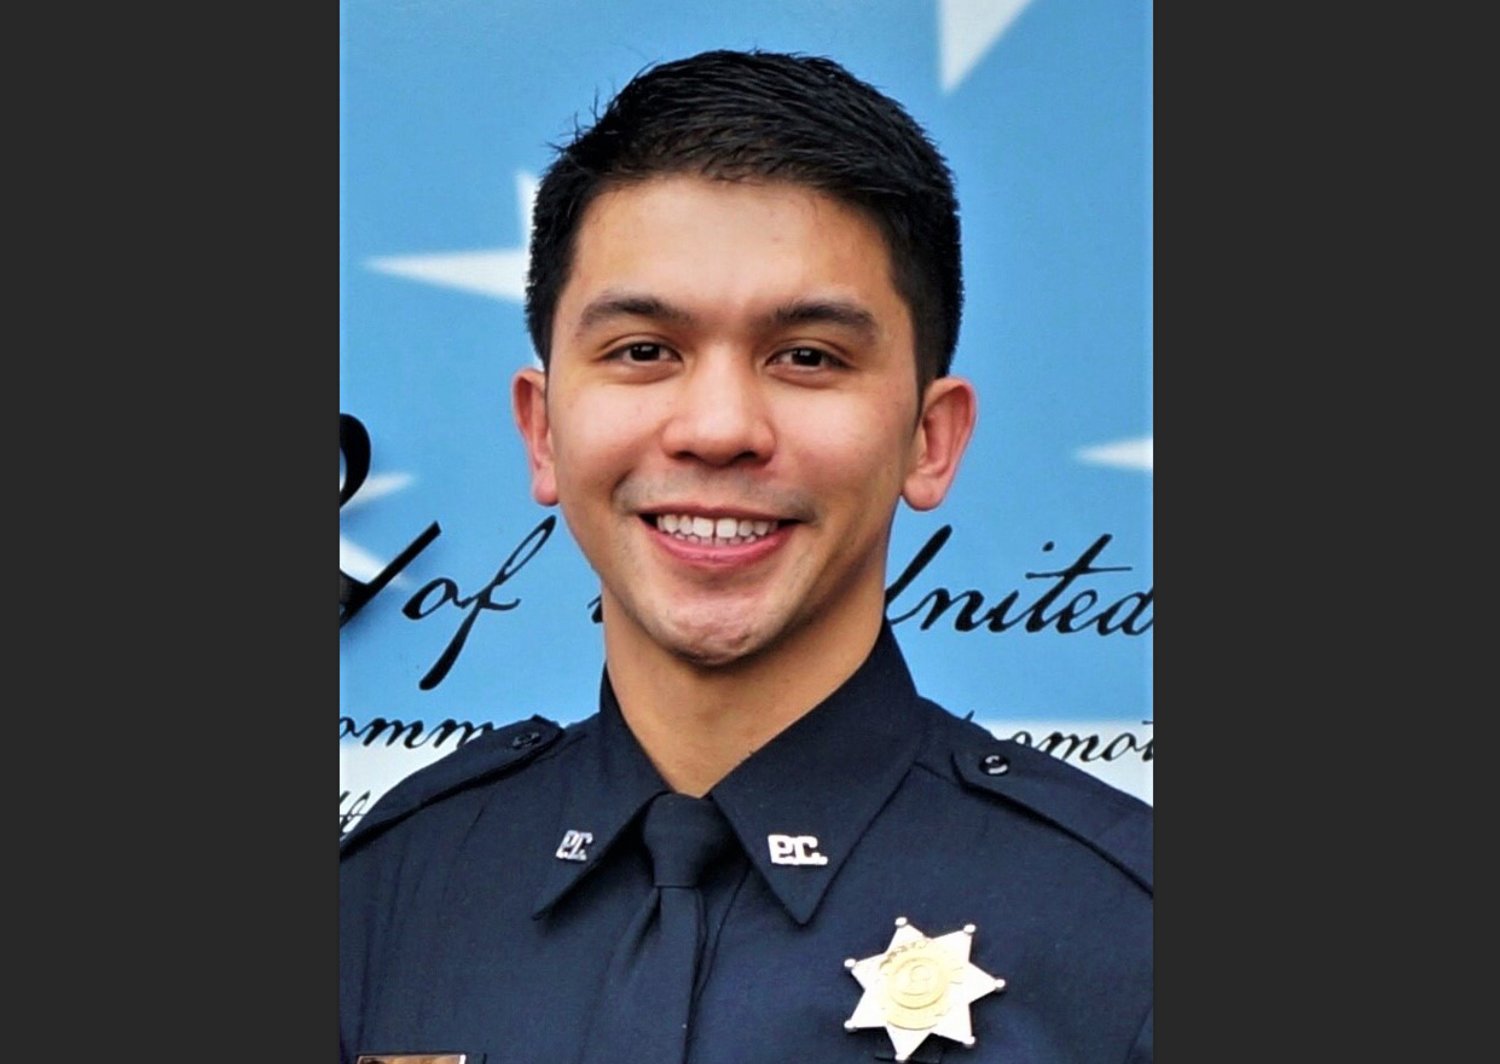 Deputy Dominique "Dom" Calata died at 2:34 p.m. at St. Joseph Medical Center in Tacoma surrounded by family members and fellow deputies and National Guard members.